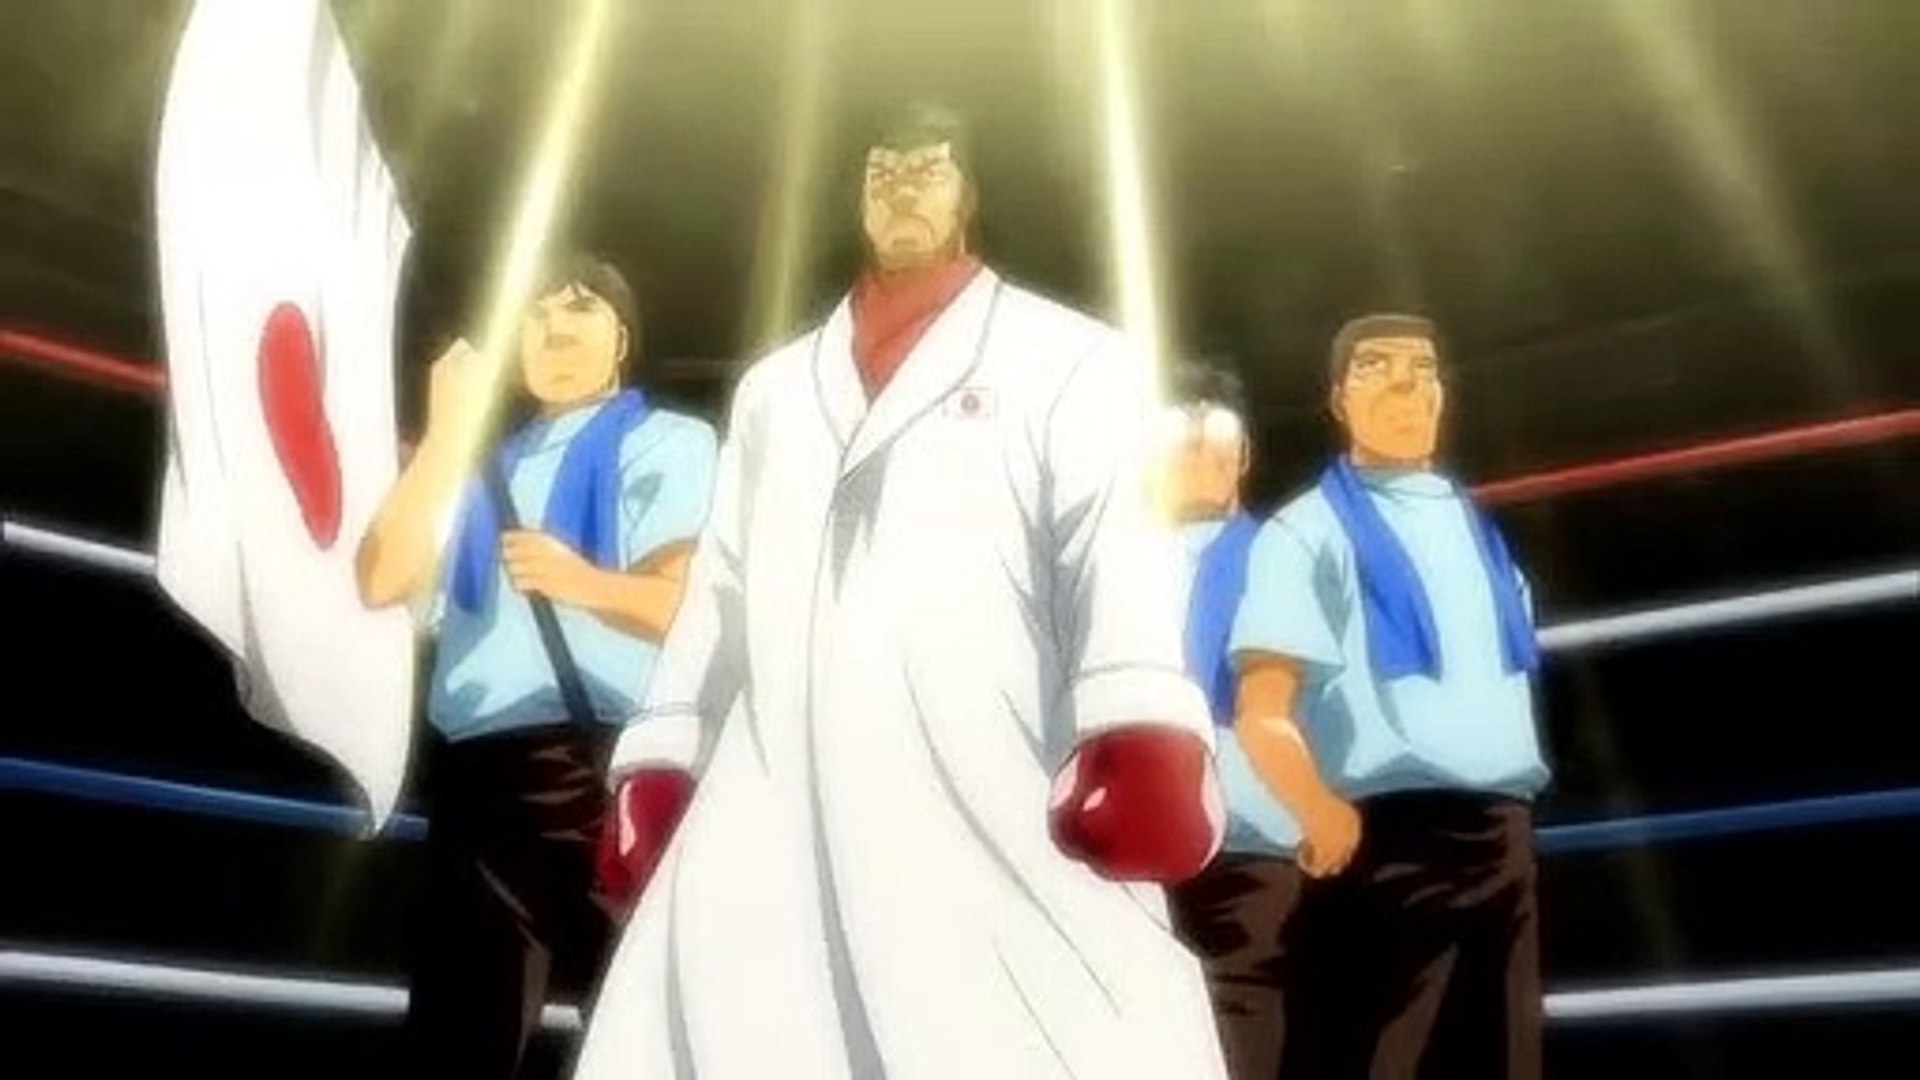 Hajime no Ippo - New Challenger - Ep20 HD Watch - video Dailymotion